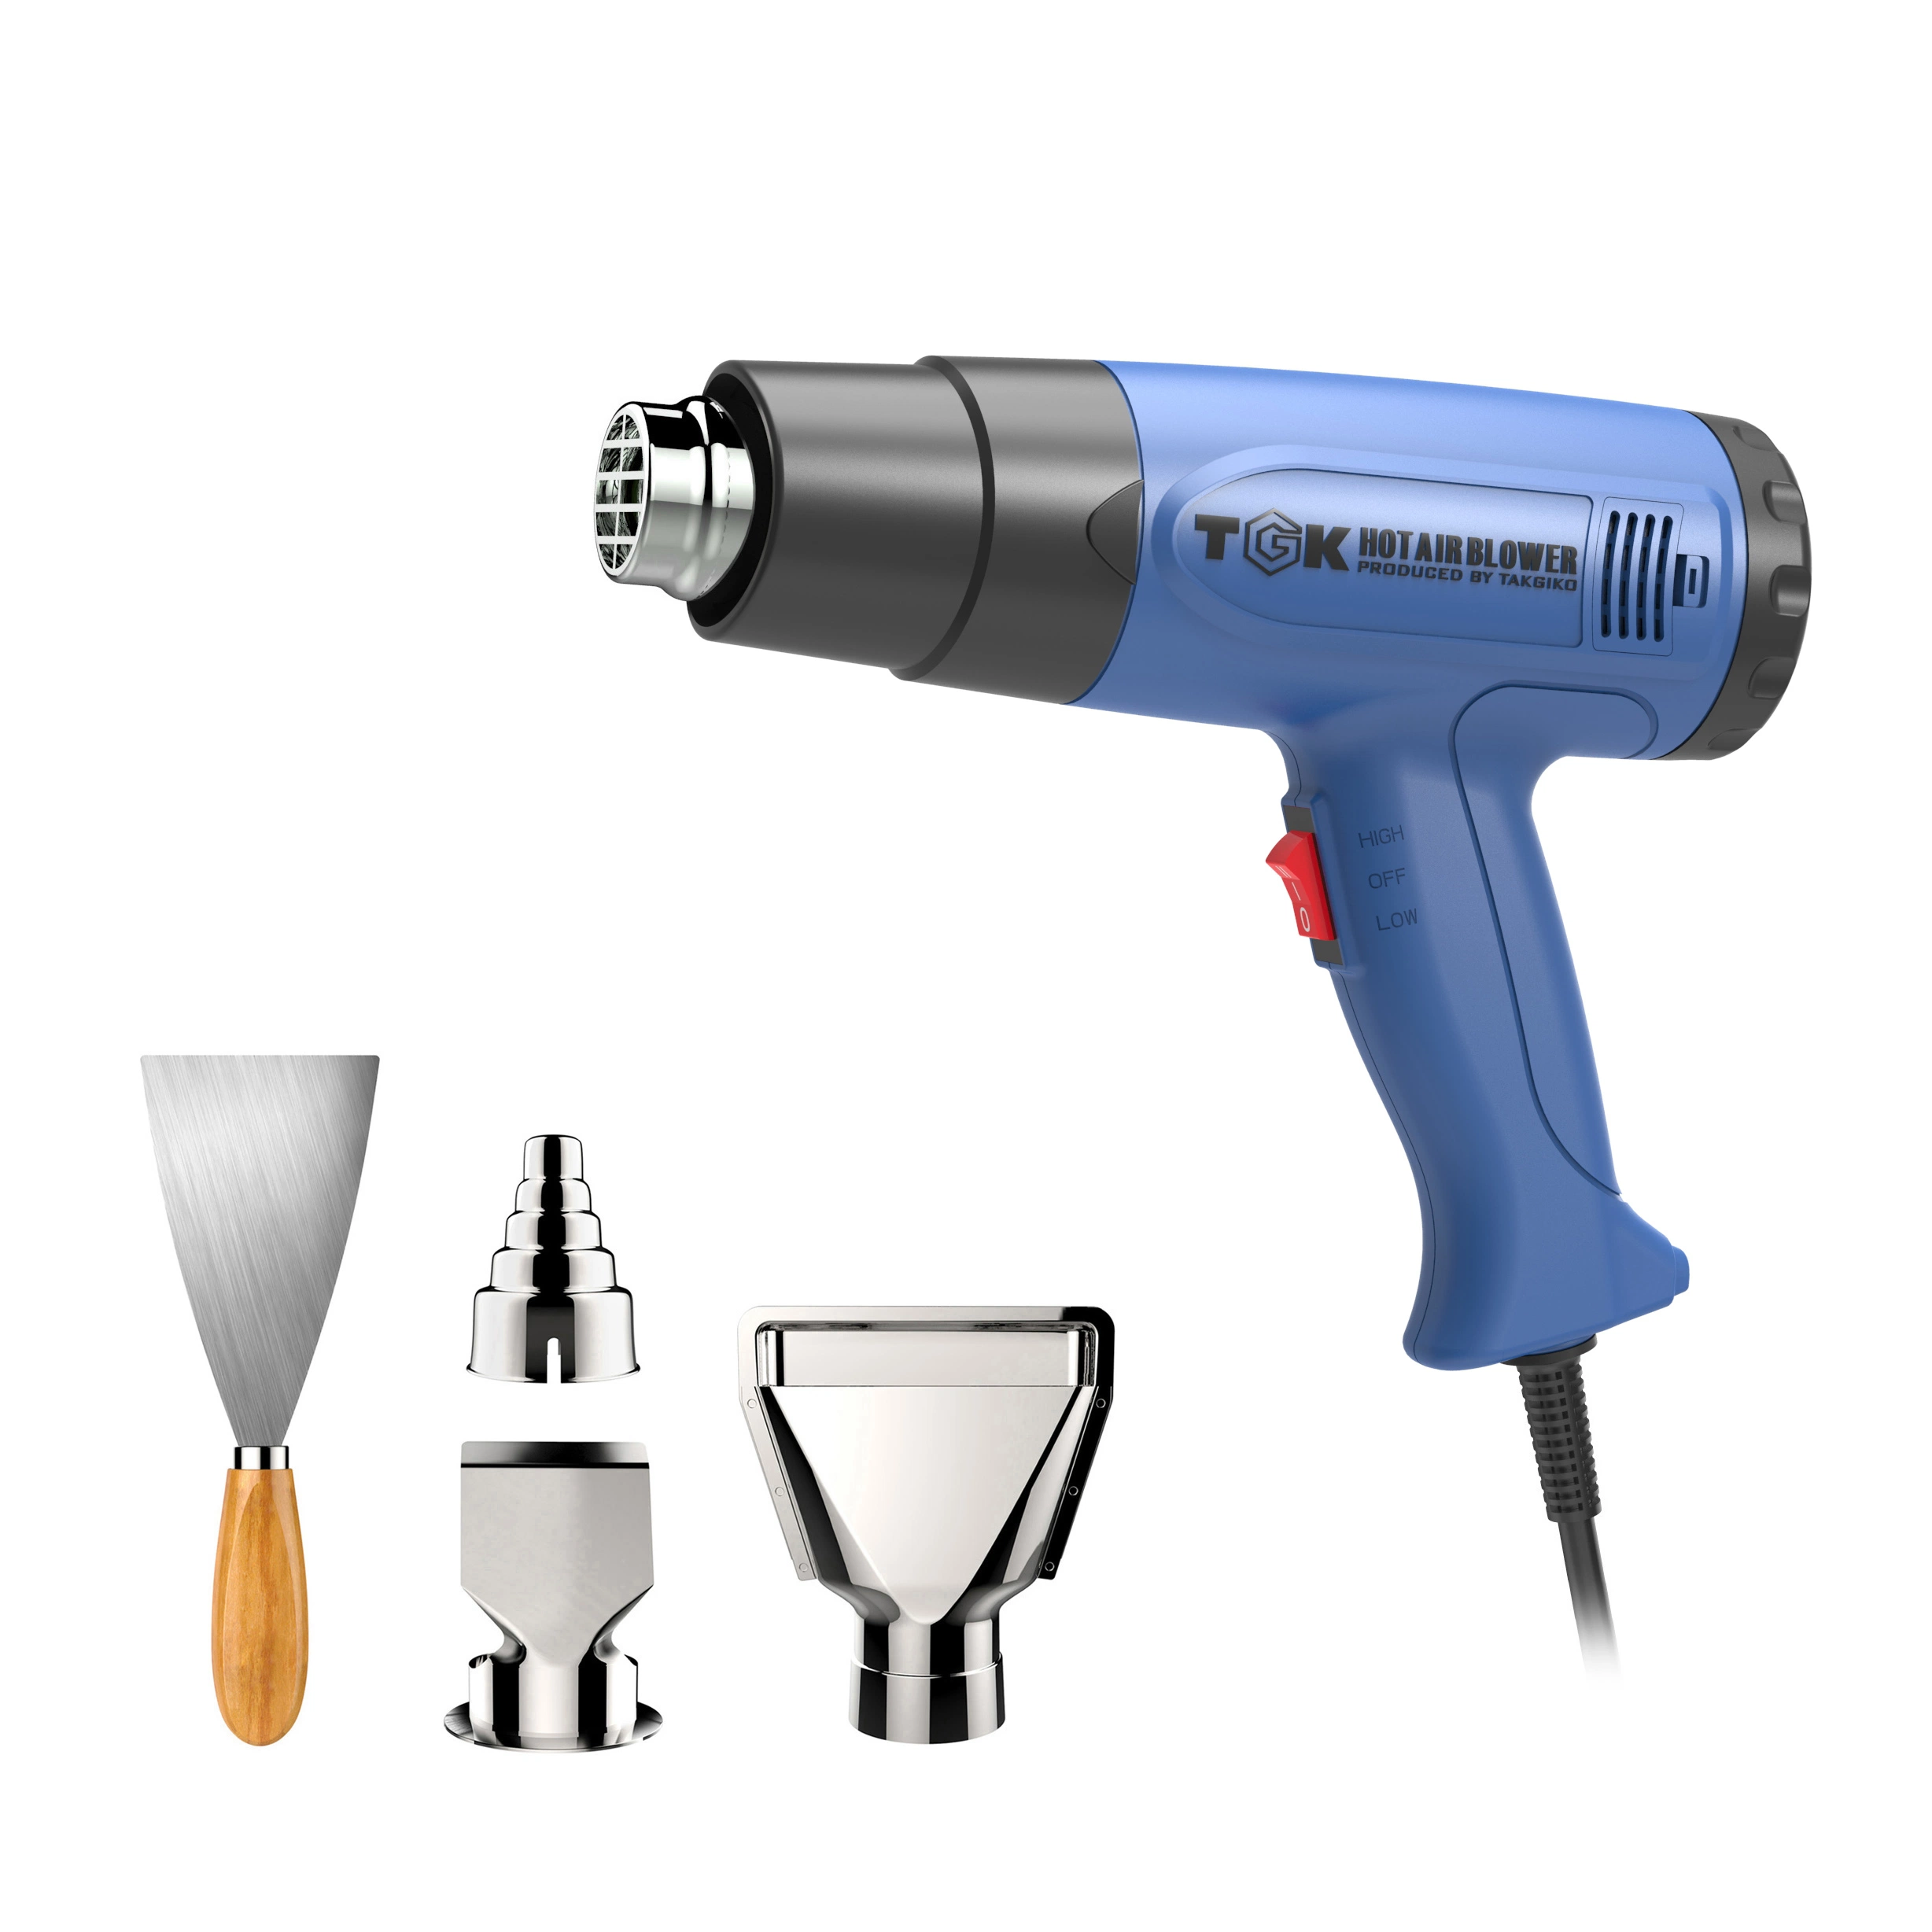 Adjustable Heat Gun to Help with Water Based Ink Curing Hg6618